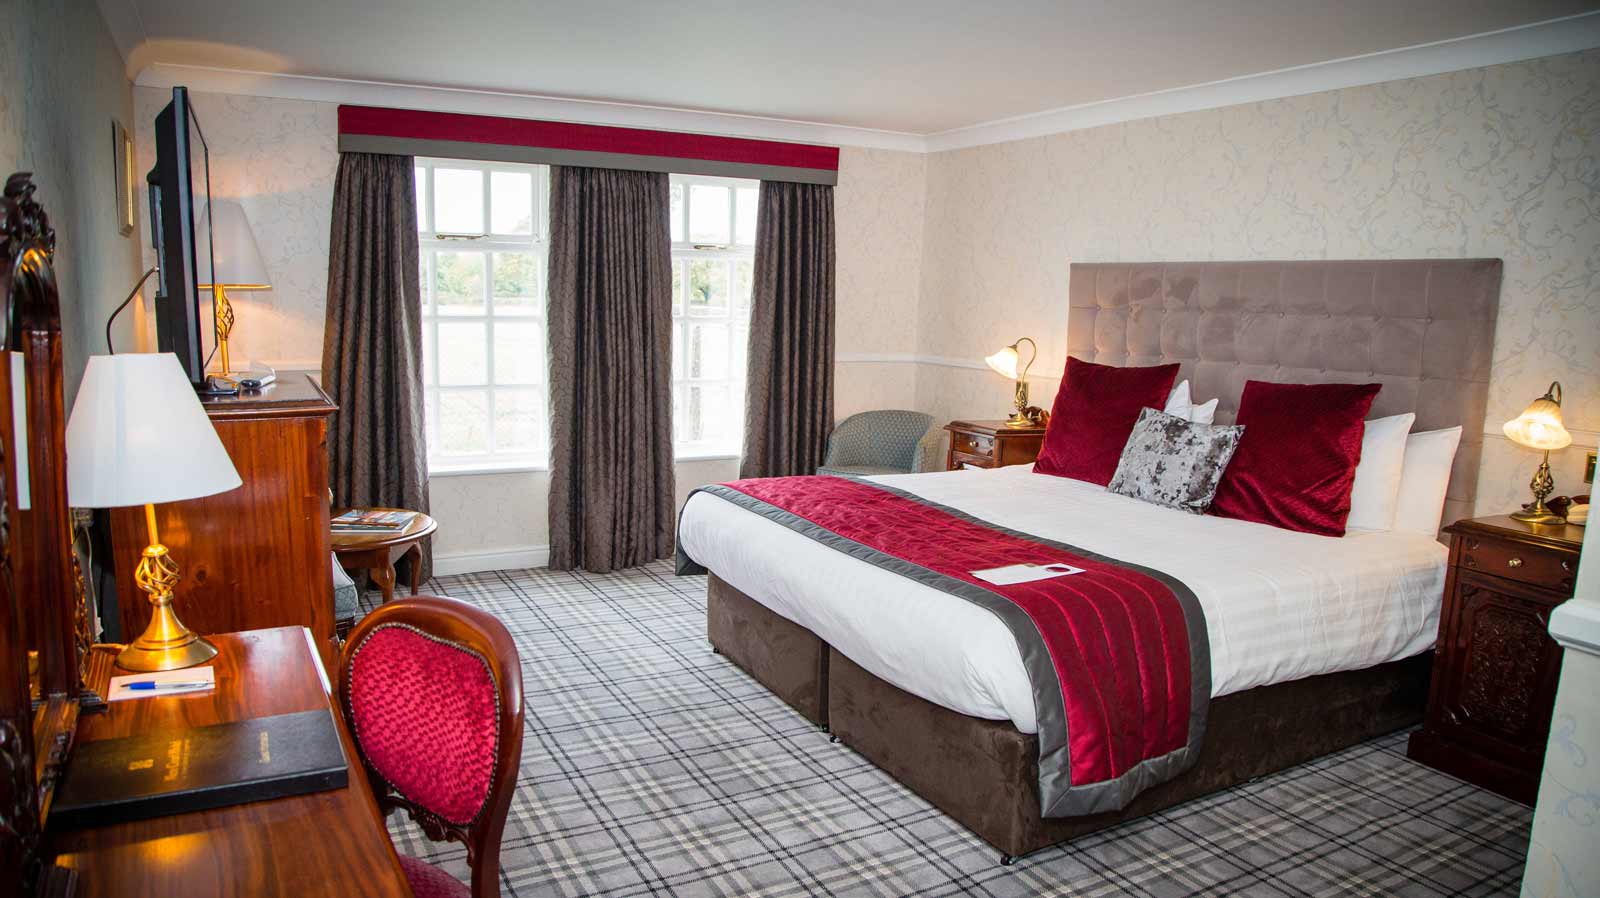 Mere Court Hotel, Knutsford, Cheshire | Bedroom